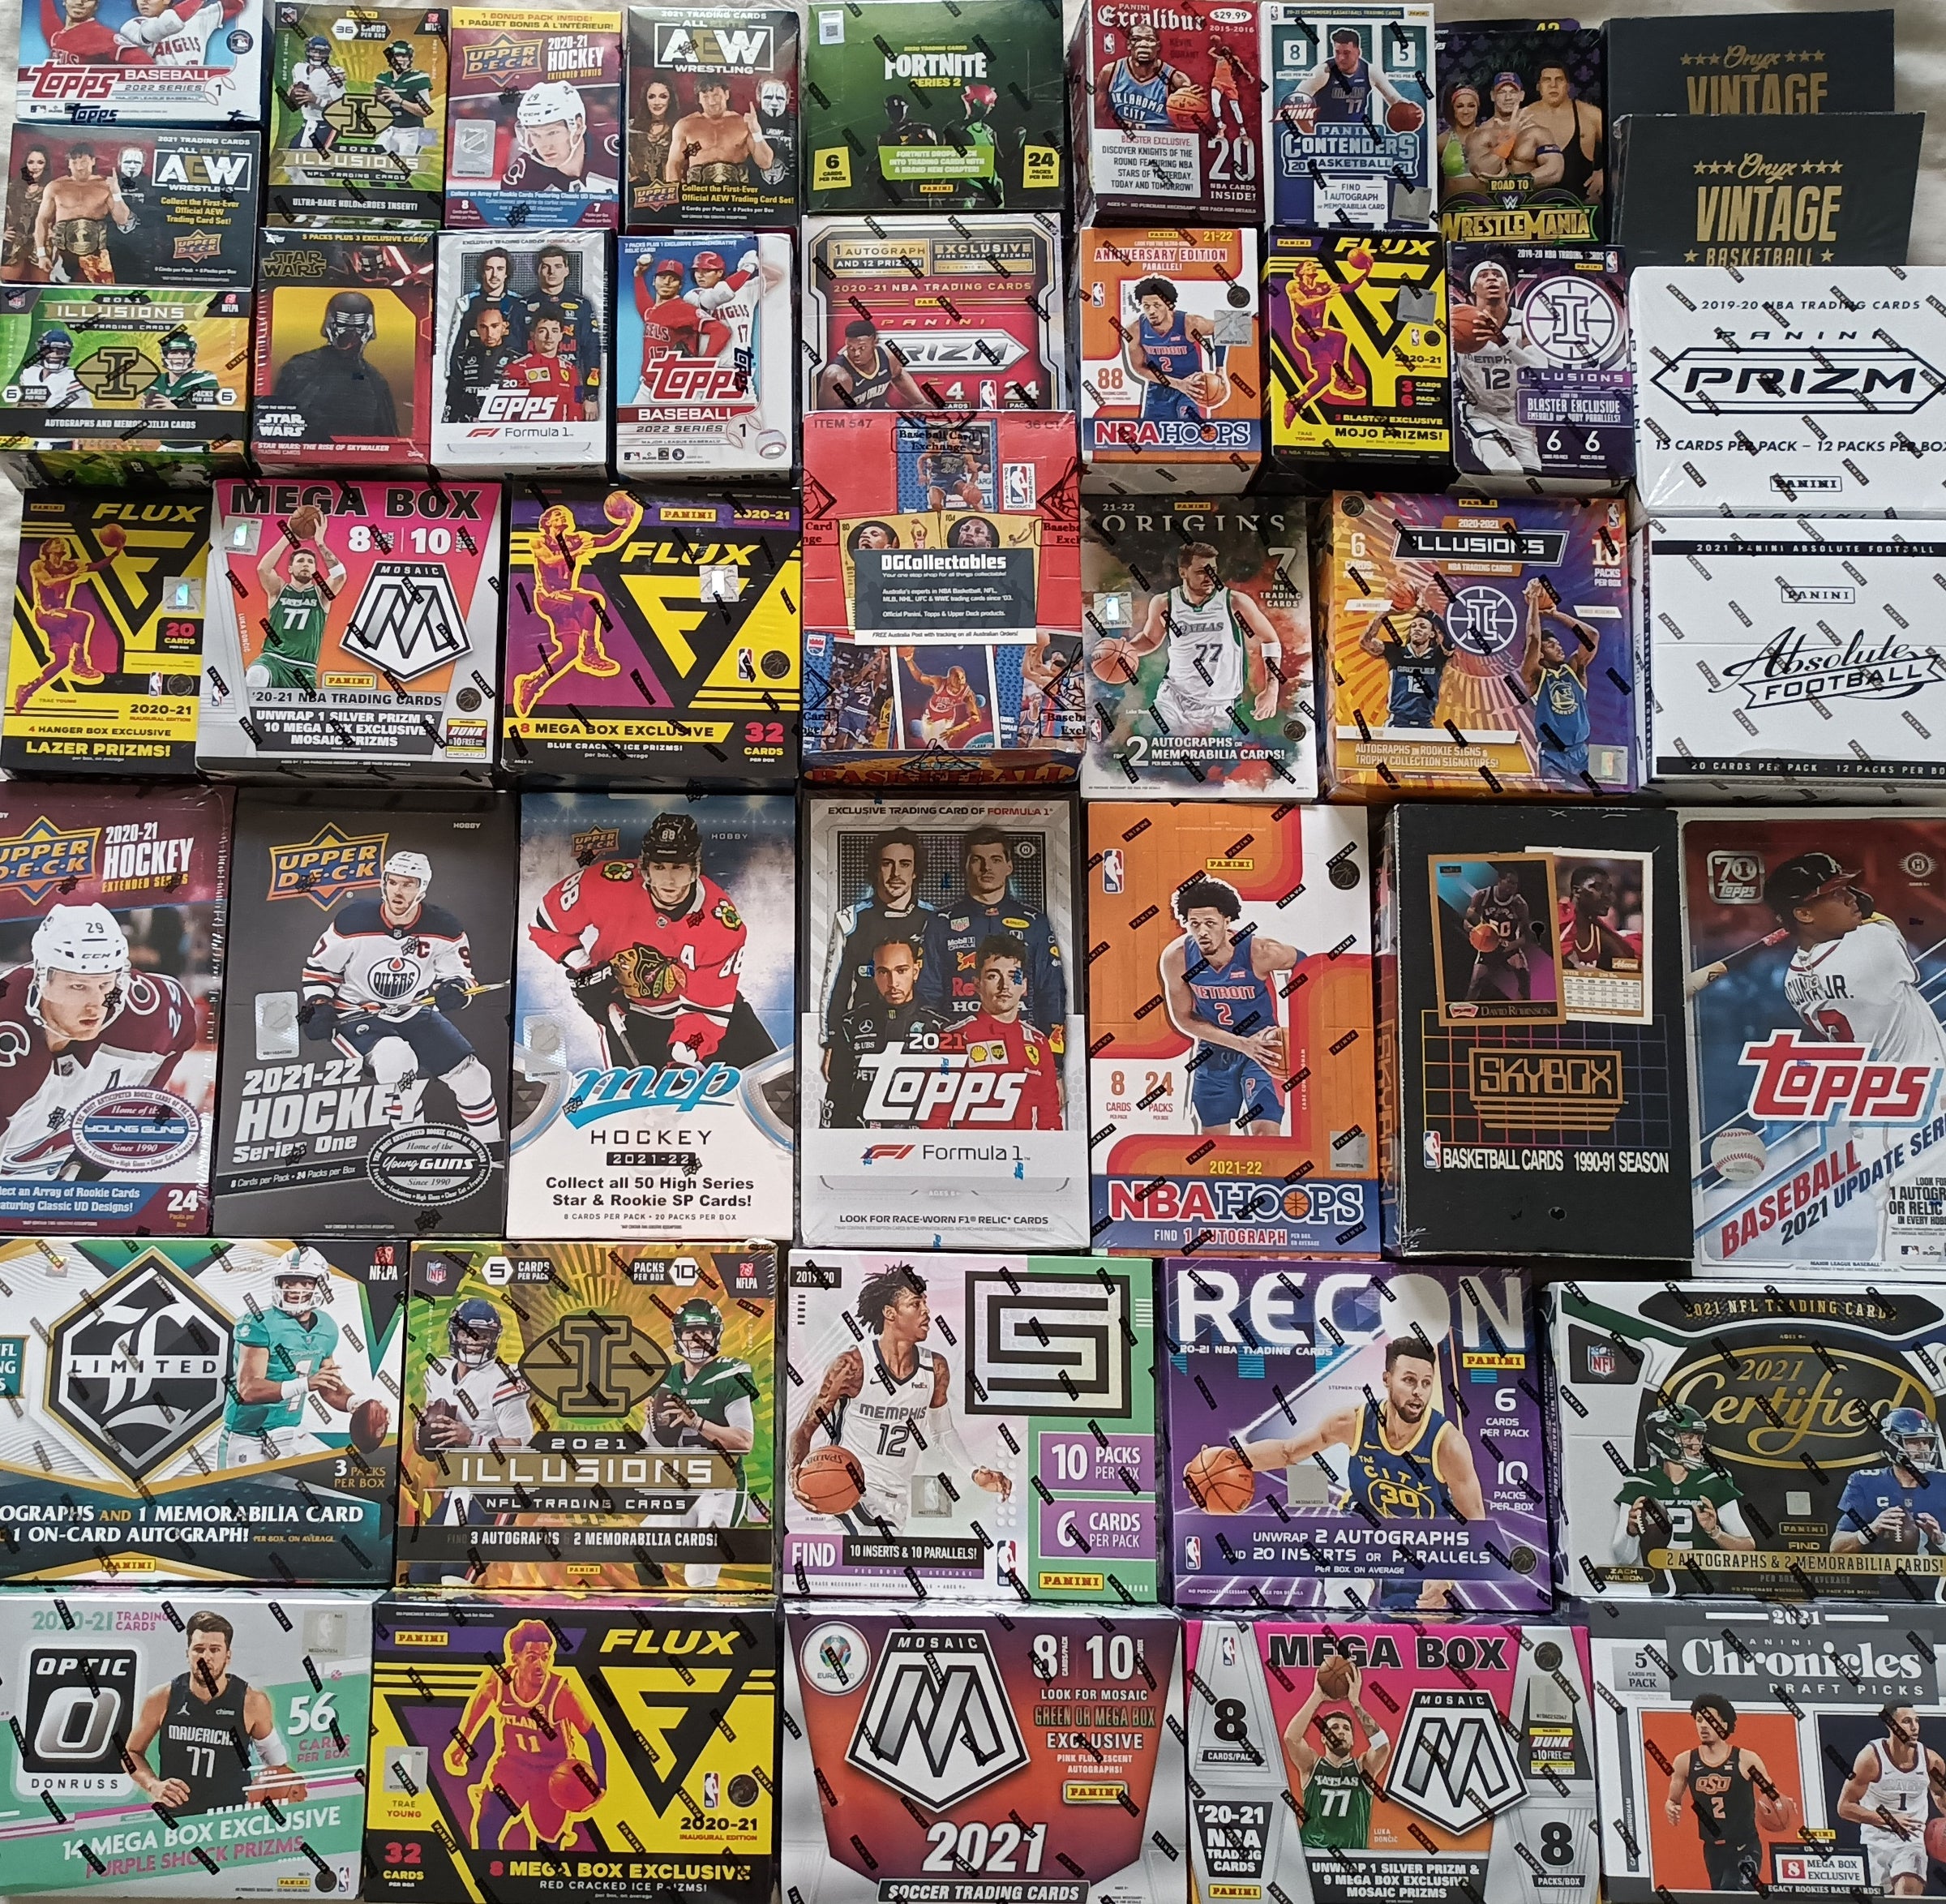 Topps, Upper deck, Donruss, Fleer, Score, Upperdeck Sports Trading Cards in  Sports Collectibles 